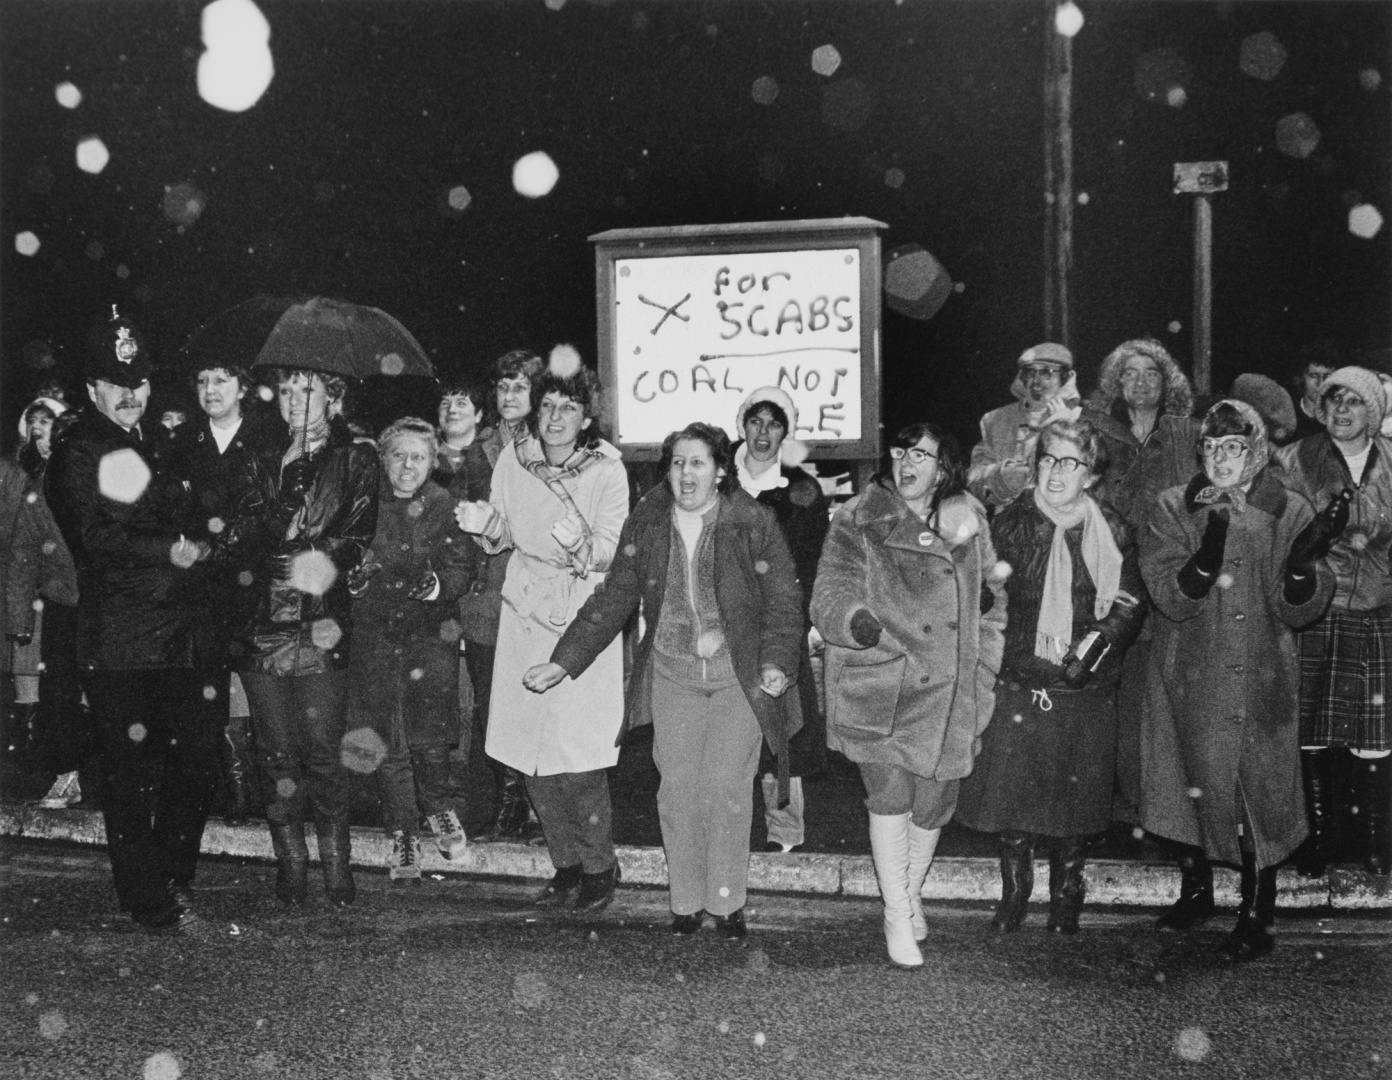 Black and white photograph of a line of women protestors wearing winter coats and carrying a sign that reads 'X for scabs, coal not dole'